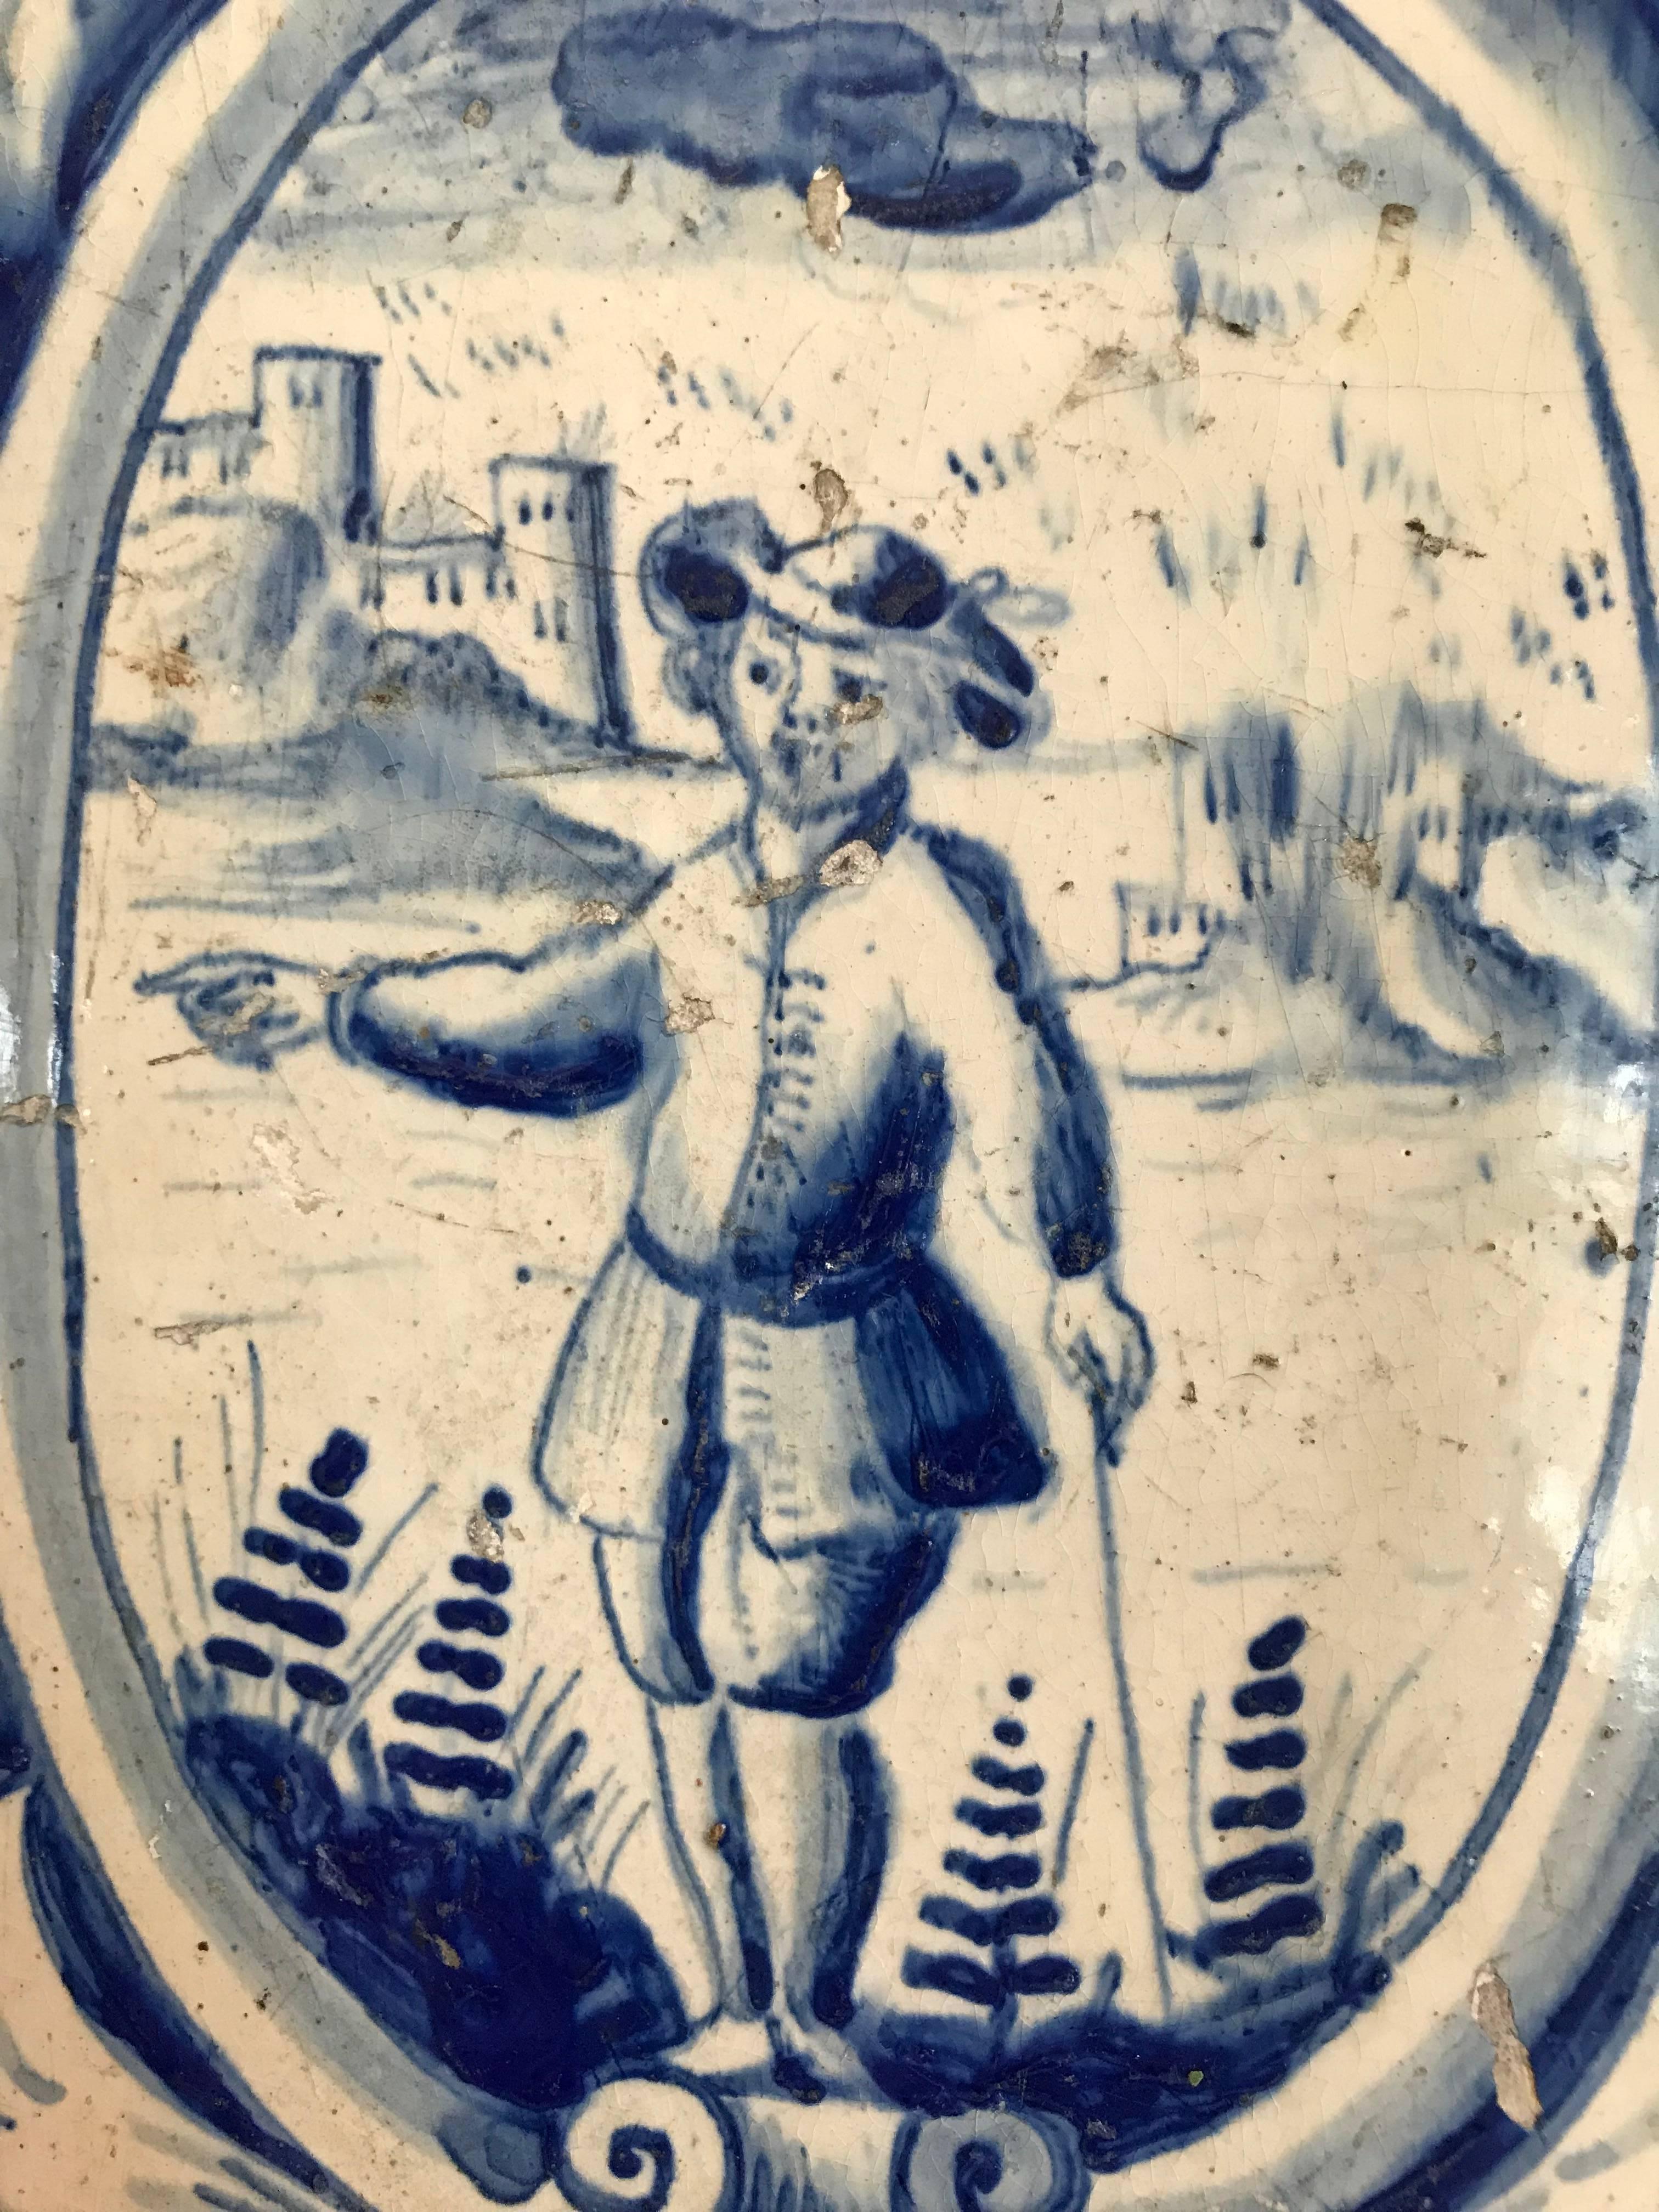 Large-scale Dutch delft stove tile with a portrait of a man with a walking stick wearing typical 18th century costume, behind him a landscape with castle. All within a cartouche framed with floral scroll work above and below.
Mounted on a removable